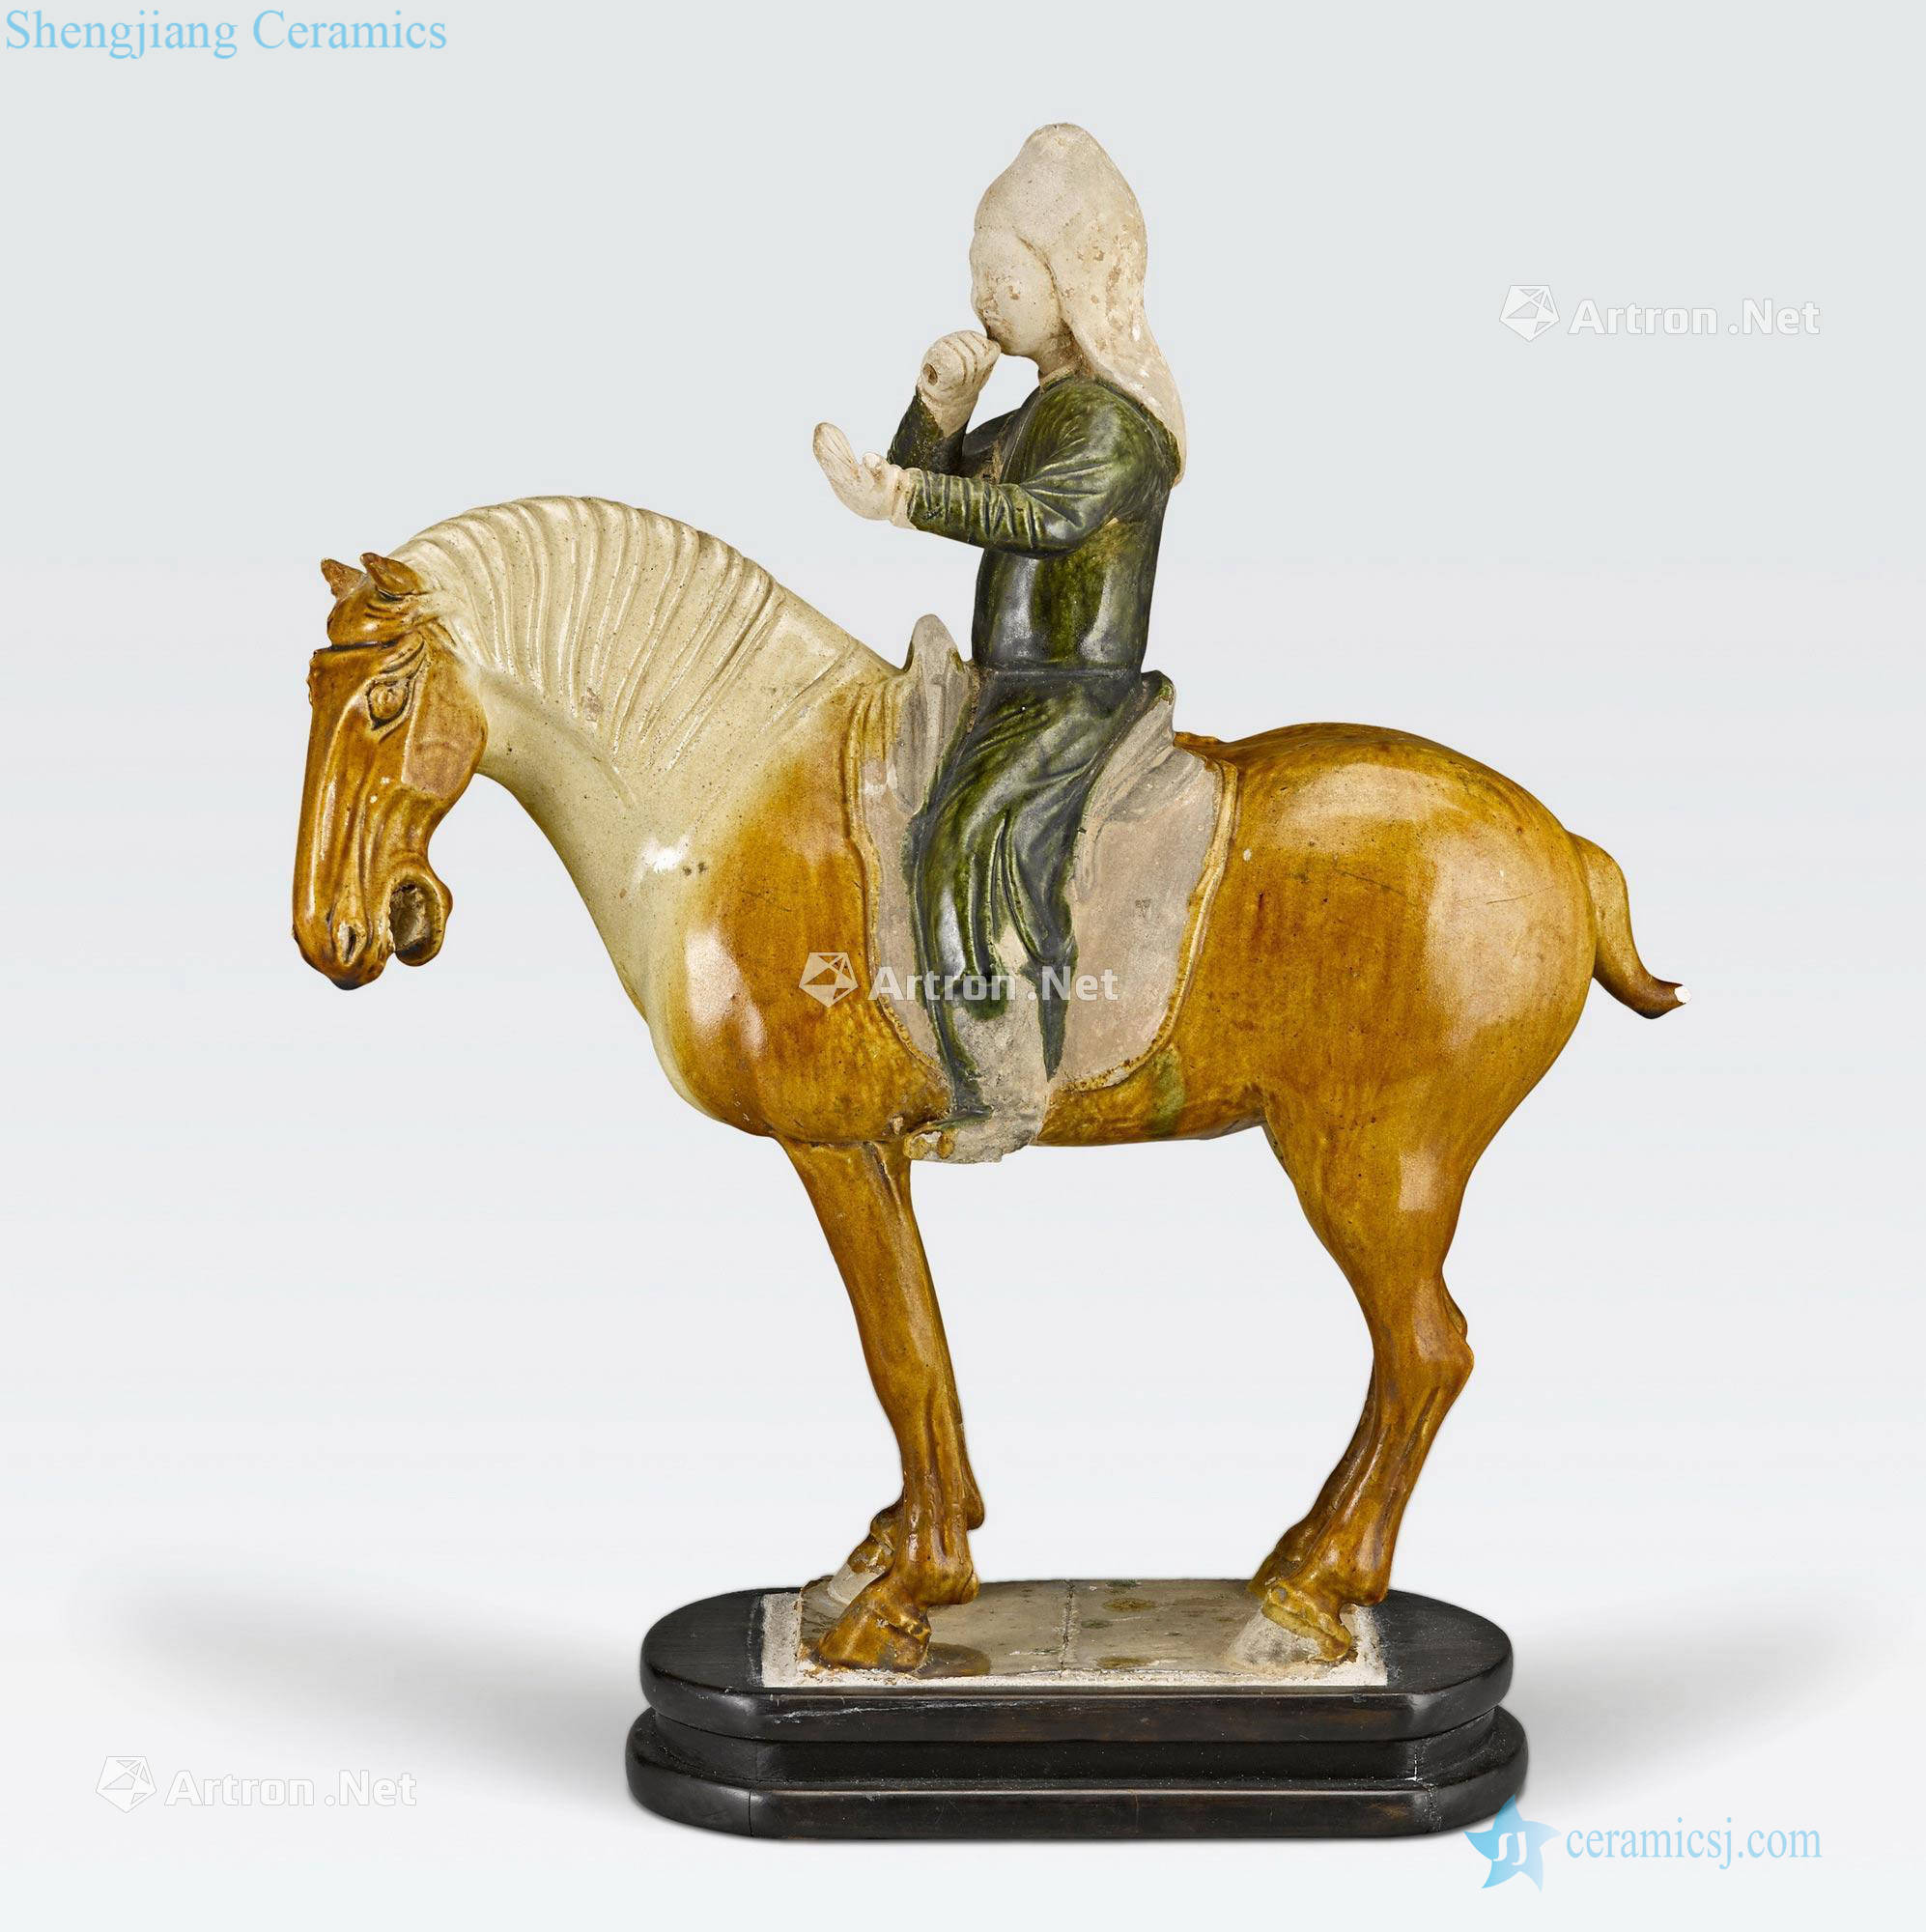 Tang dynasty A SANCAI GLAZED POTTERY HORSE AND RIDER